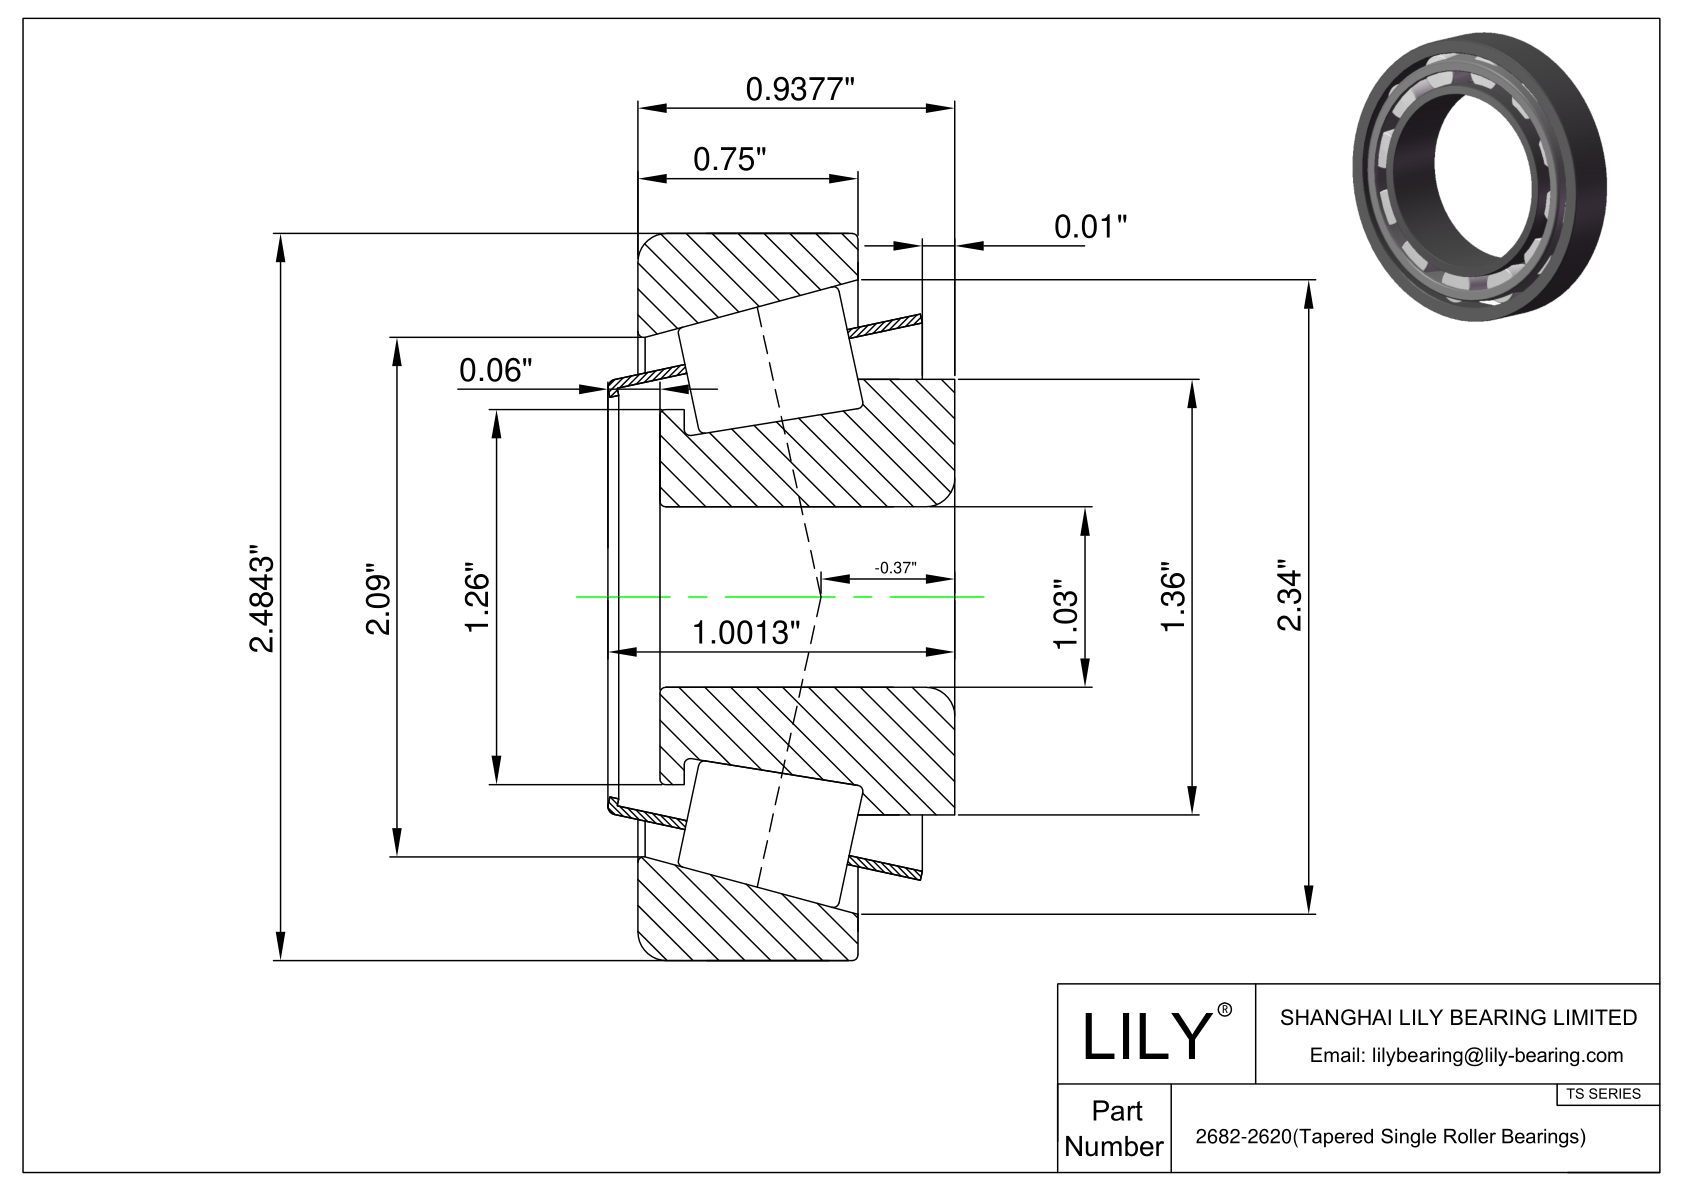 2682-2620 TS (Tapered Single Roller Bearings) (Imperial) cad drawing